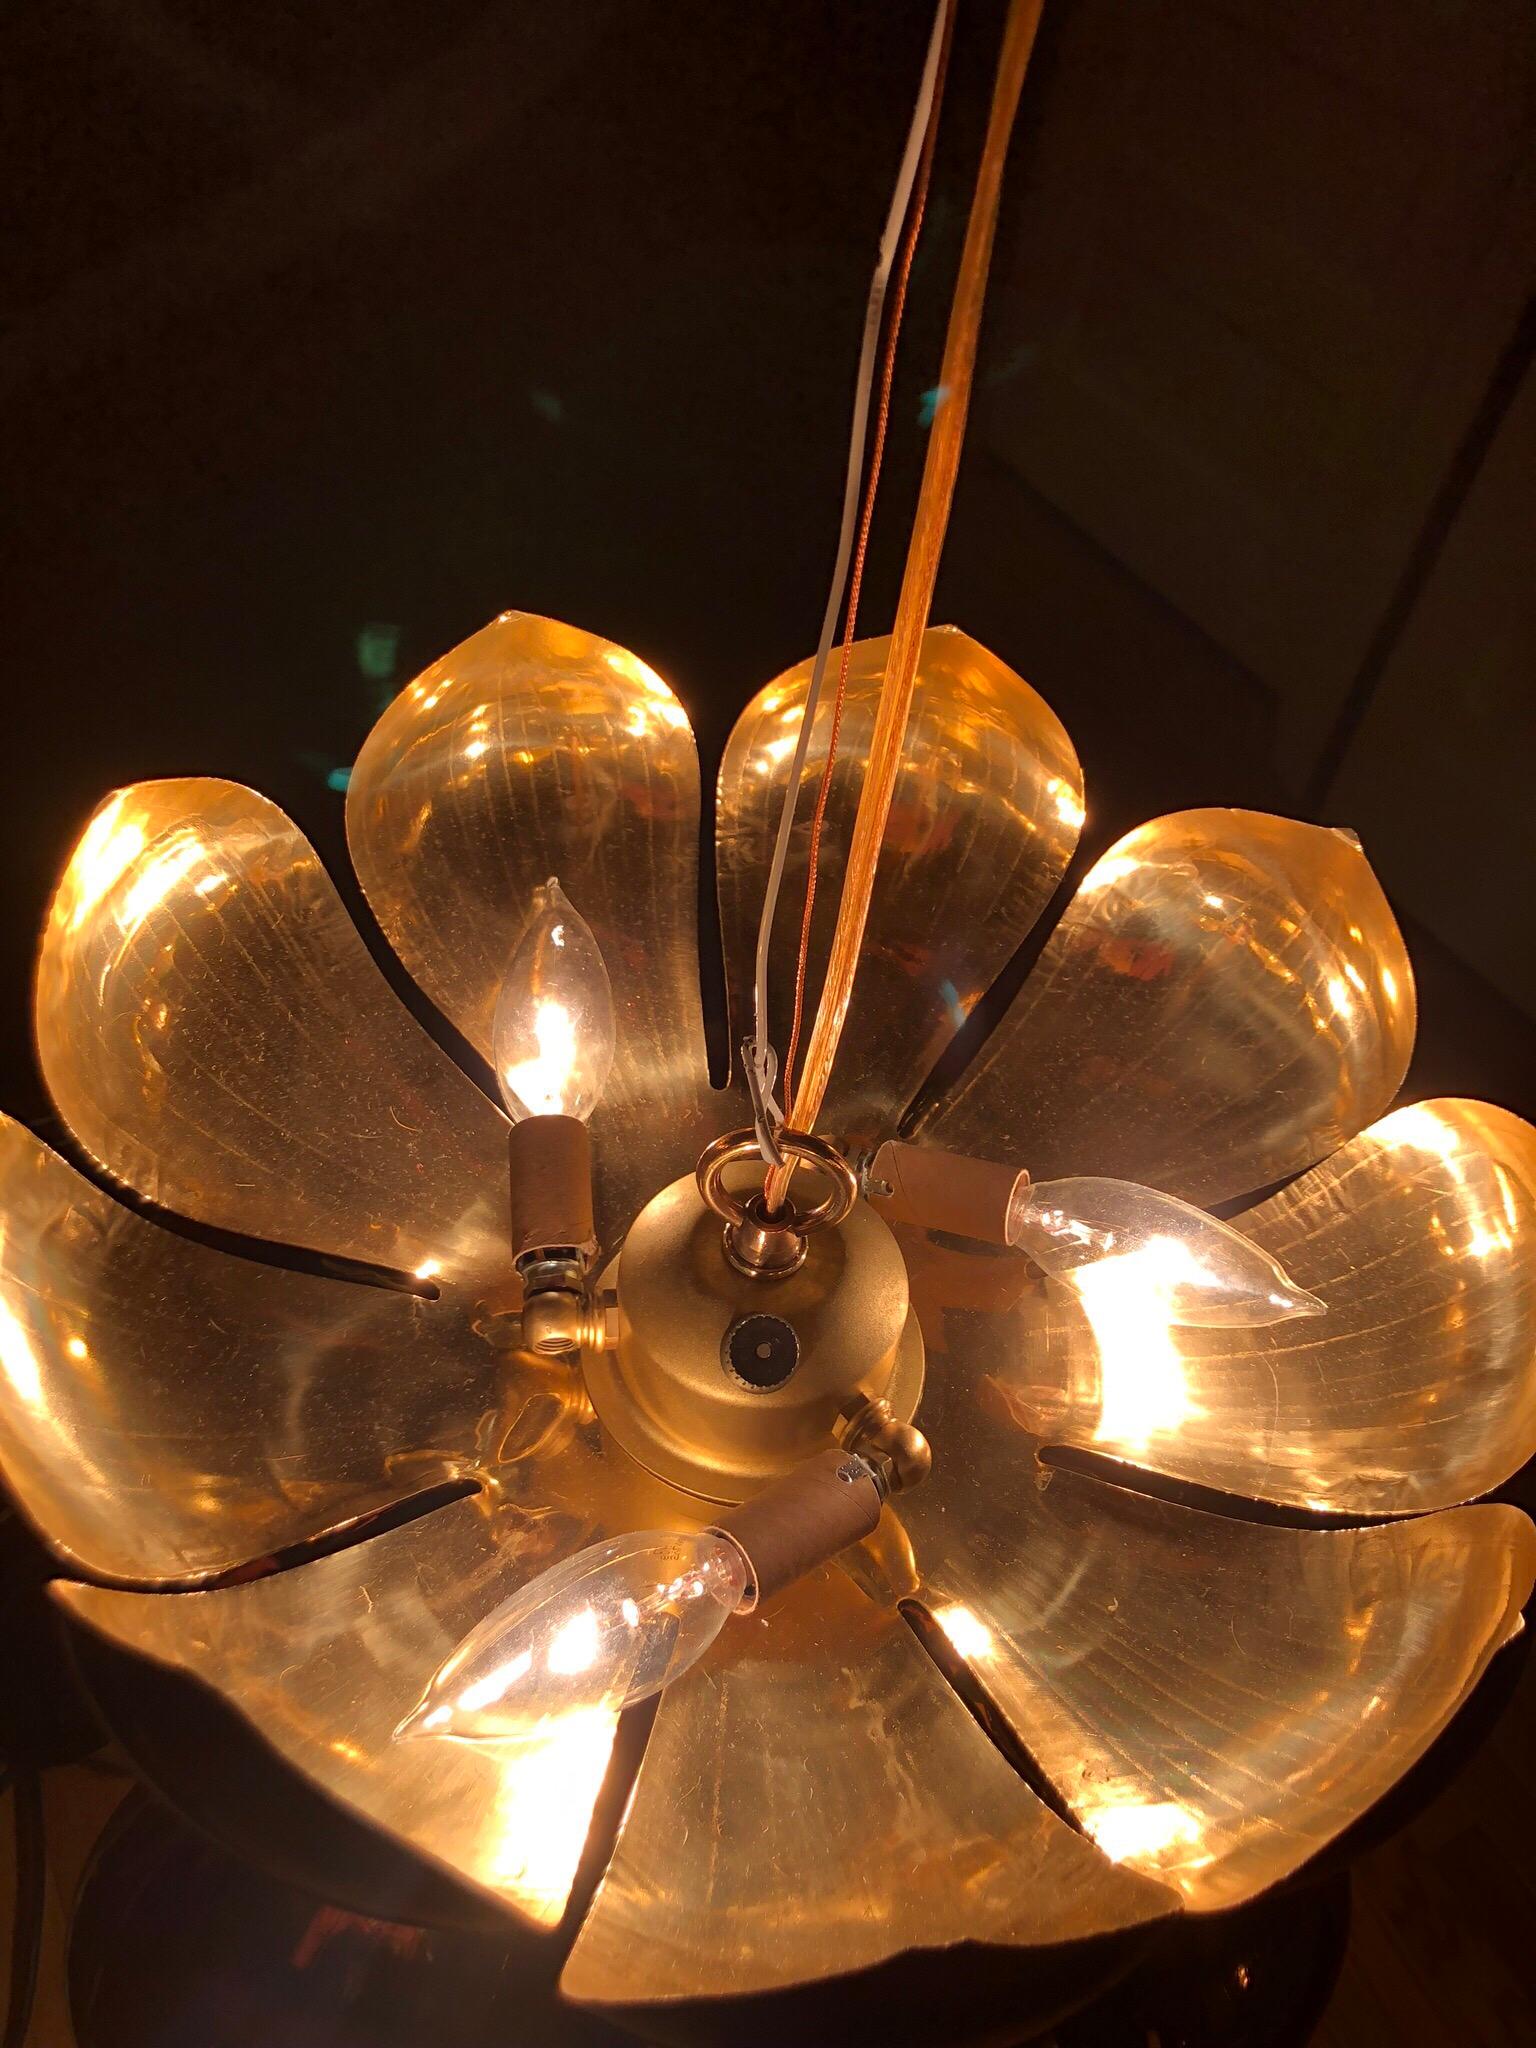 Parzinger style large brass lotus pedant fixture by Feldman Lighting Company. Delicate and beautifully etched brass petals feature both up an down lights. The largest of the Feldman Lotus Fixtures - and often described as in the style of Tommi